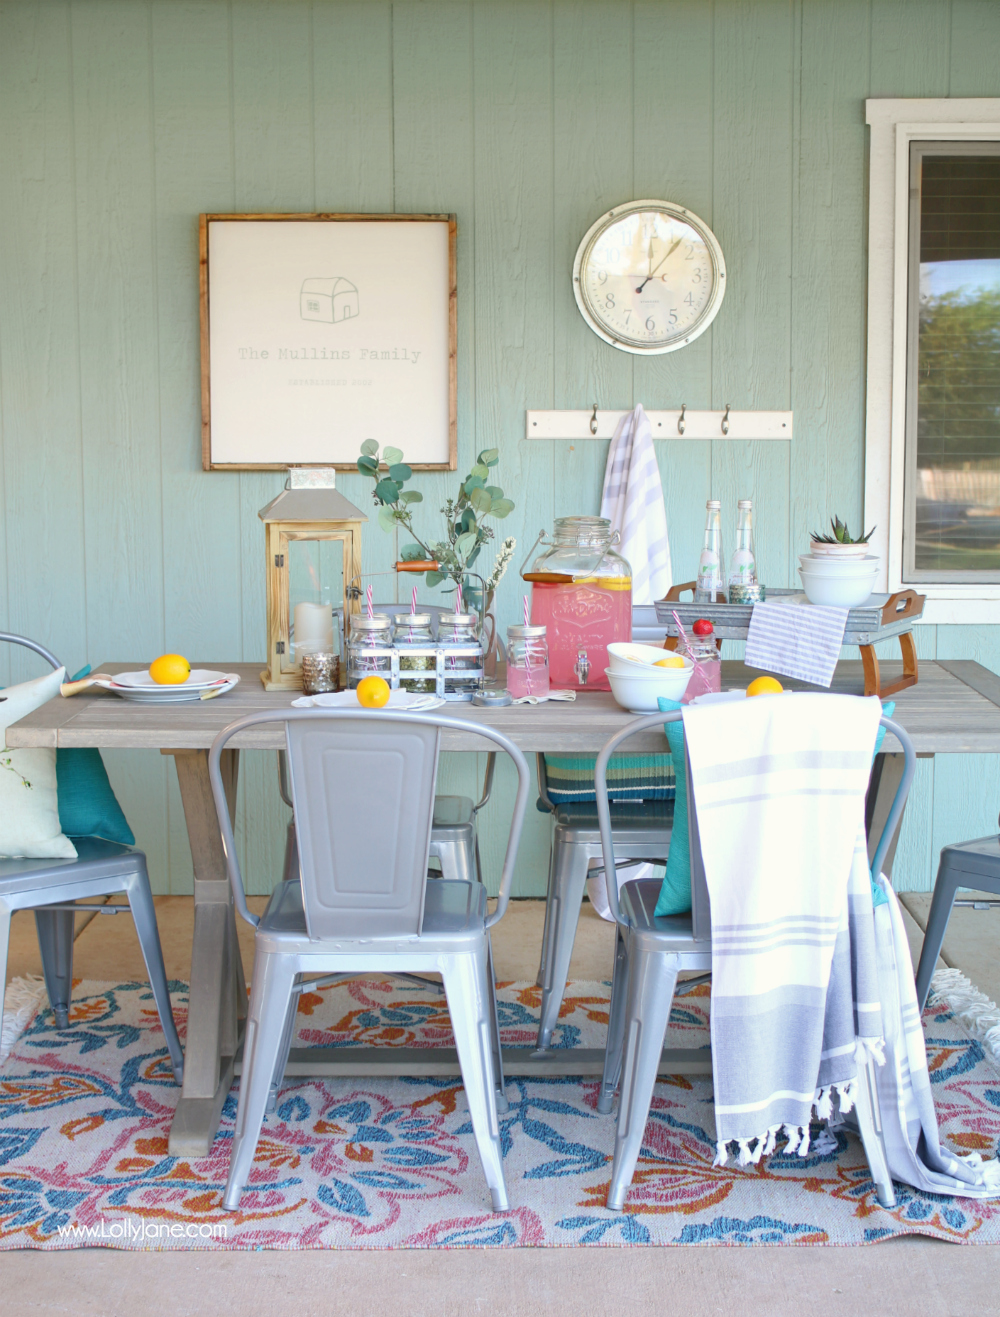 This outdoor tablescape is perfect for summer... so cheery and bright! Love the metal accents and that farmhouse table is dreamy! Great tips to learn how to spruce up your own backyard for summer entertaining!